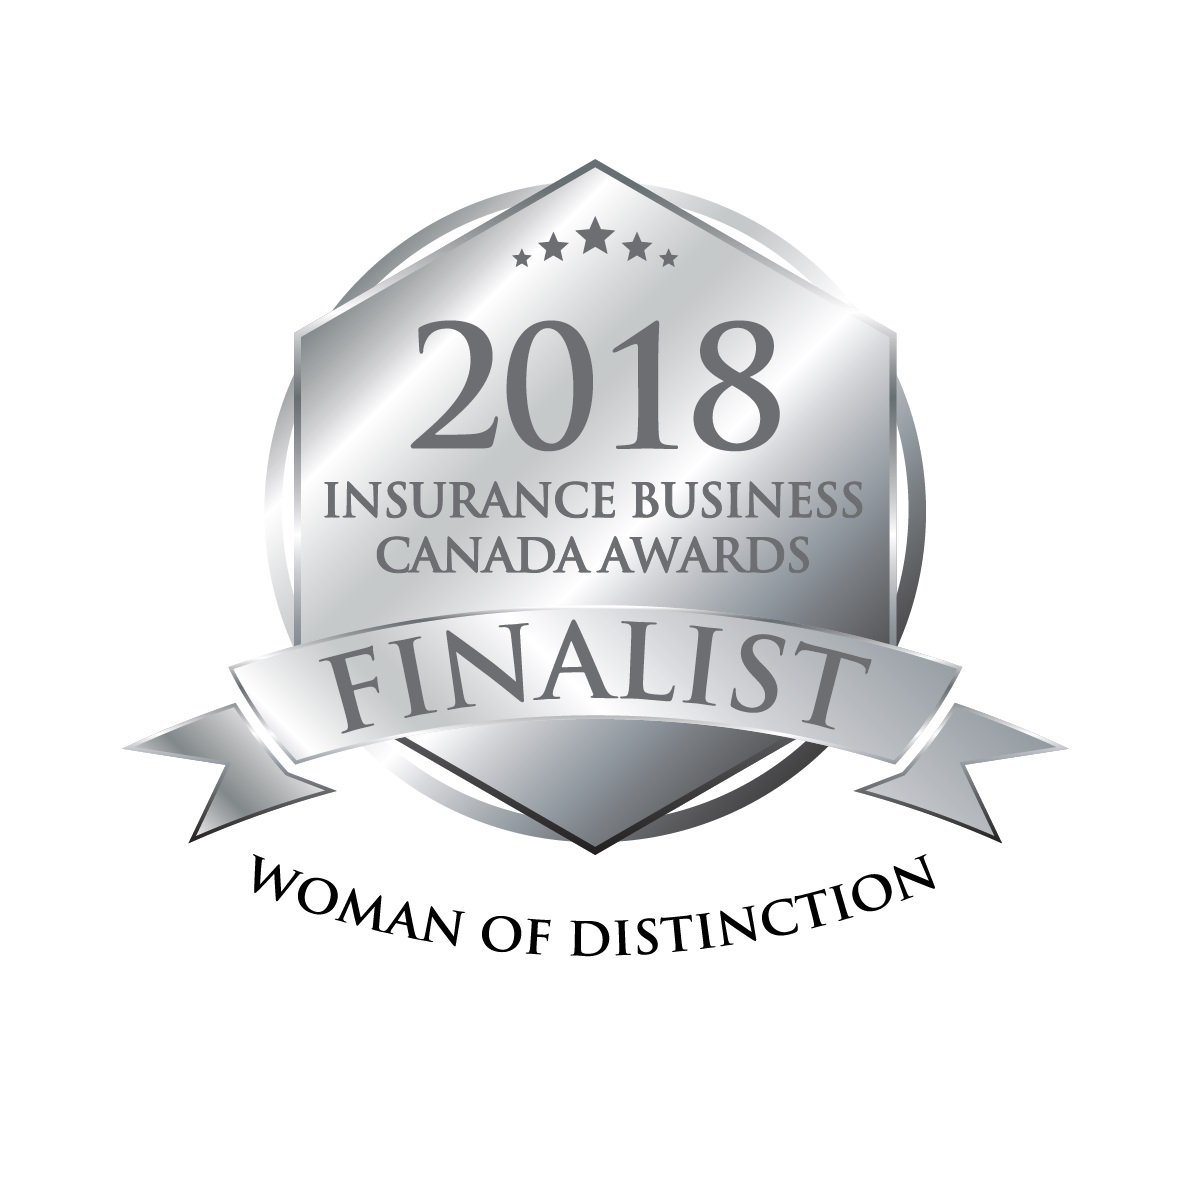 Incredibly humbled and honoured to learn I am among a select group of 'outstanding female trailblazer' Finalists for this year's Insurance Business Awards - Woman of Distinction Award 2018. Thank you for your nominations and support! #IBAwardsCA